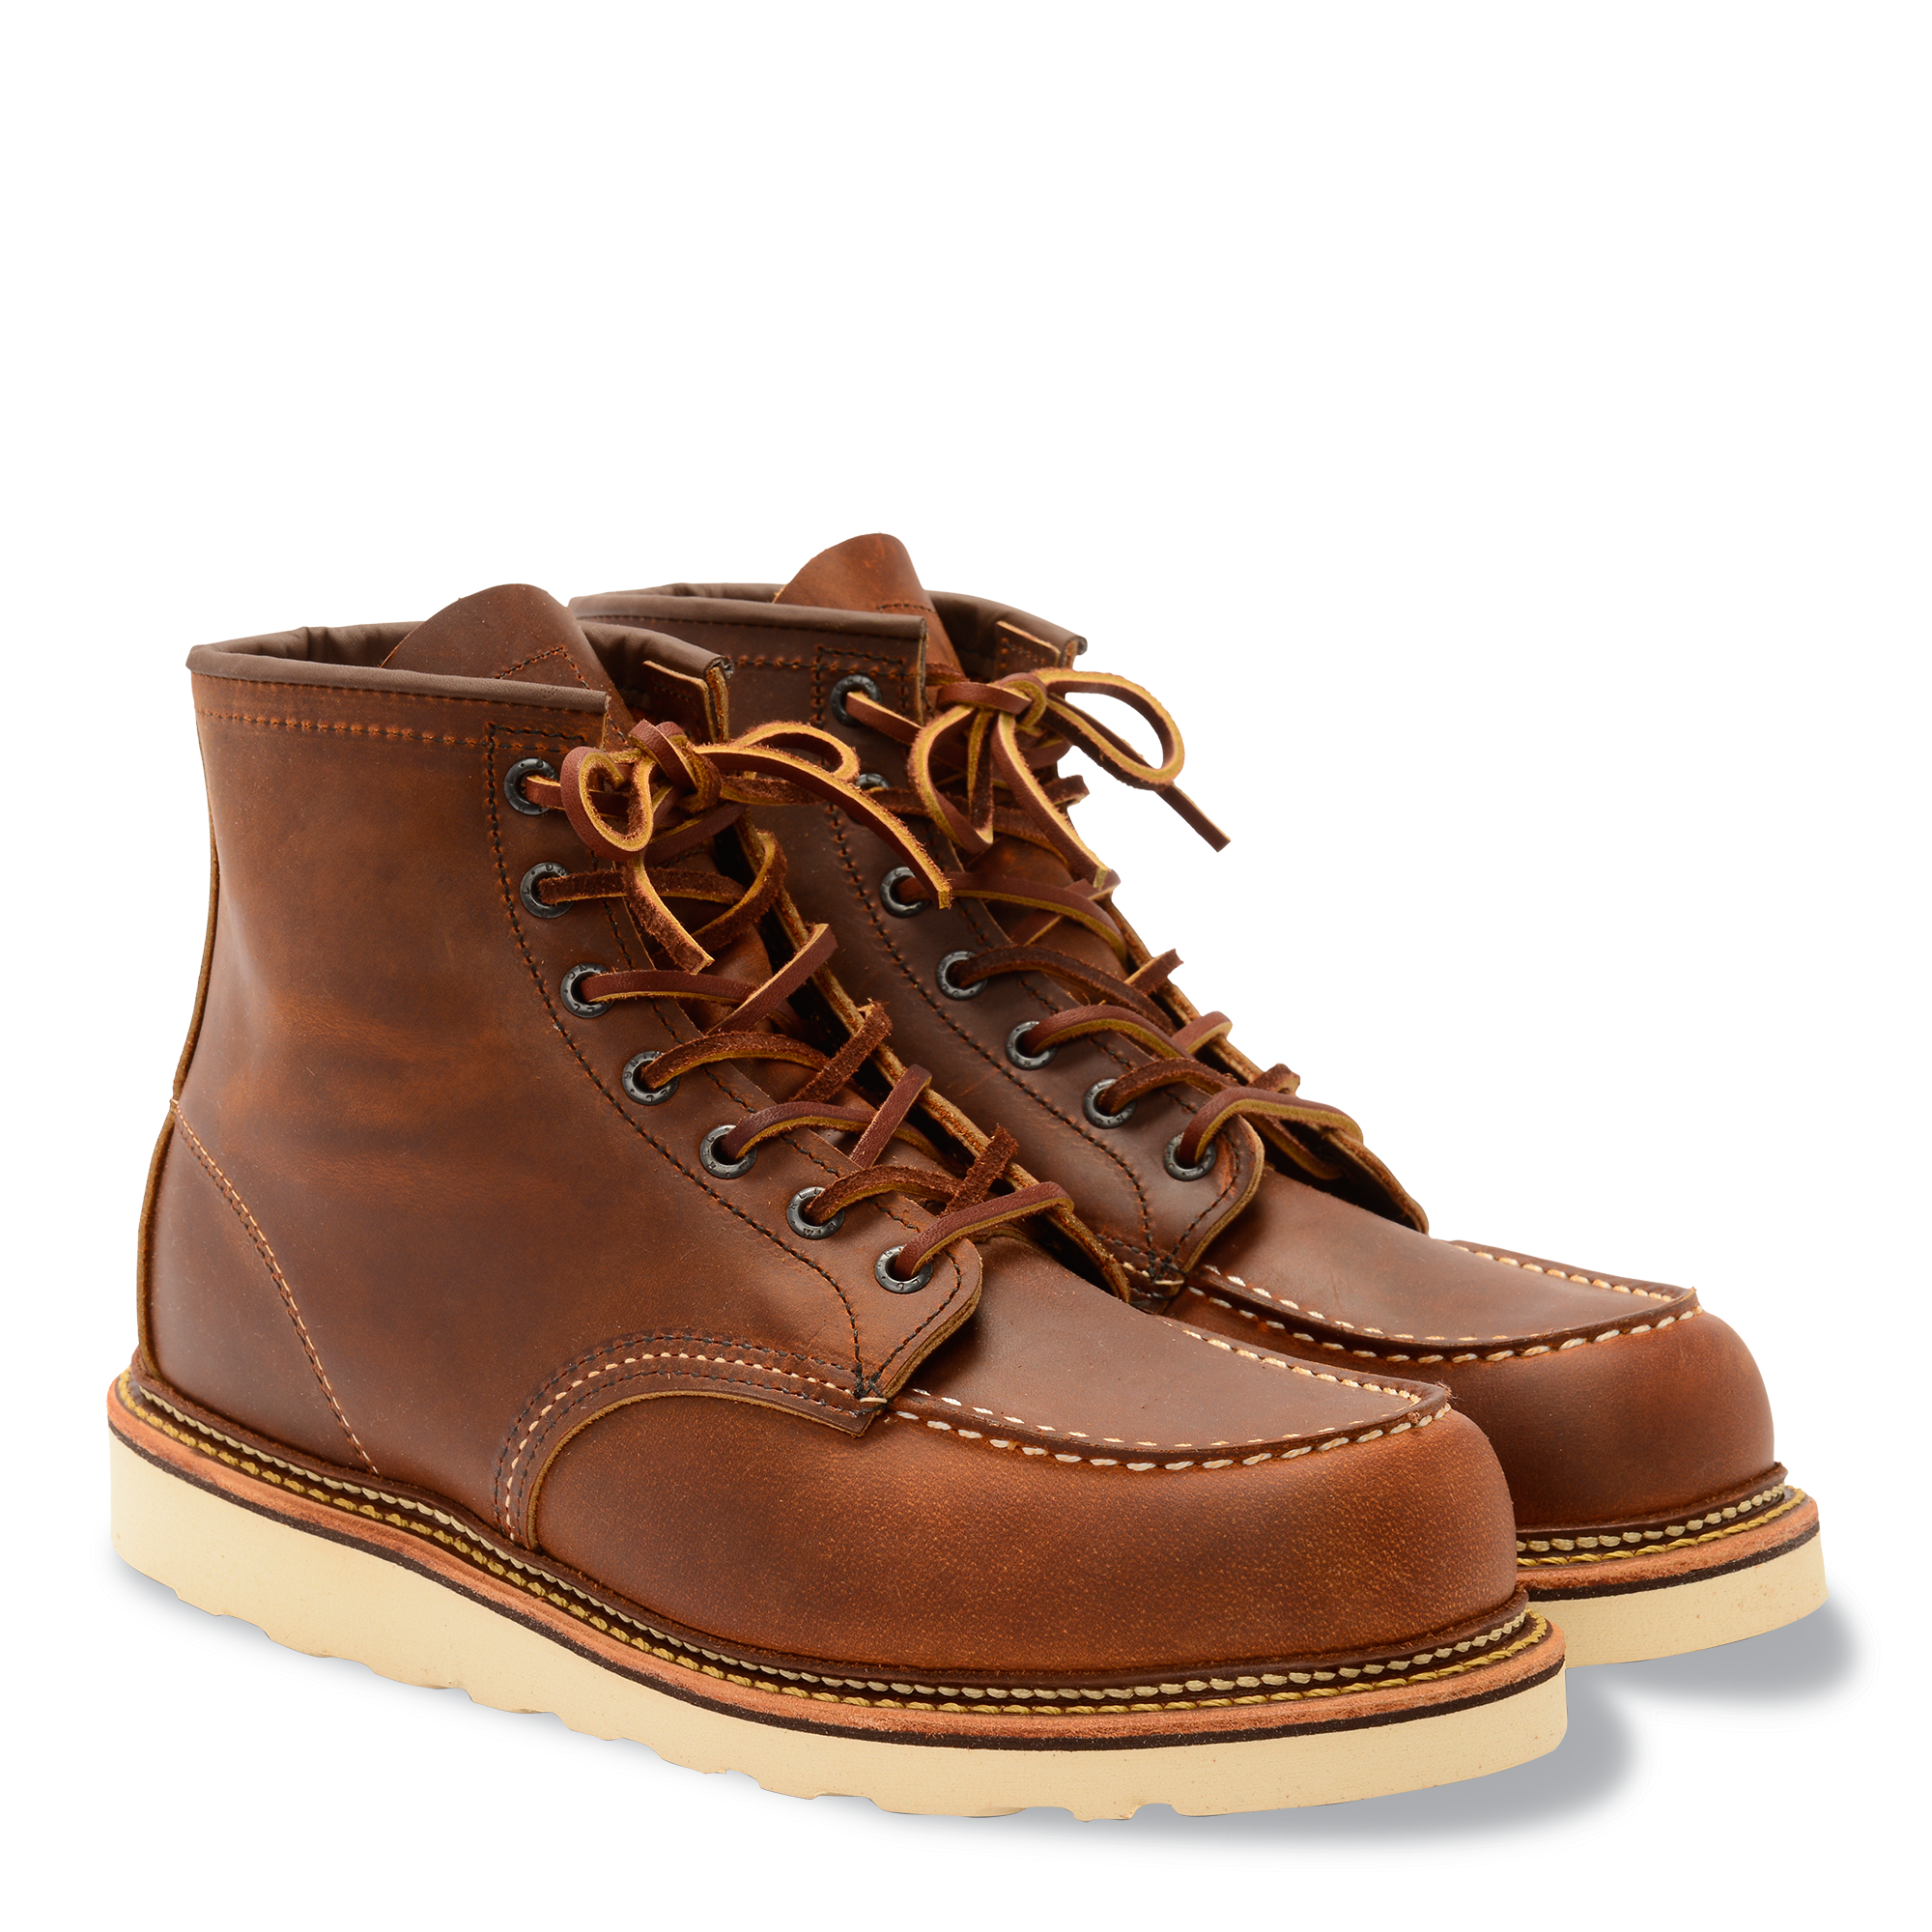 Red Wing Men's Classic Moc 6-Inch Boot Copper 1907 Rough & Tough Leather